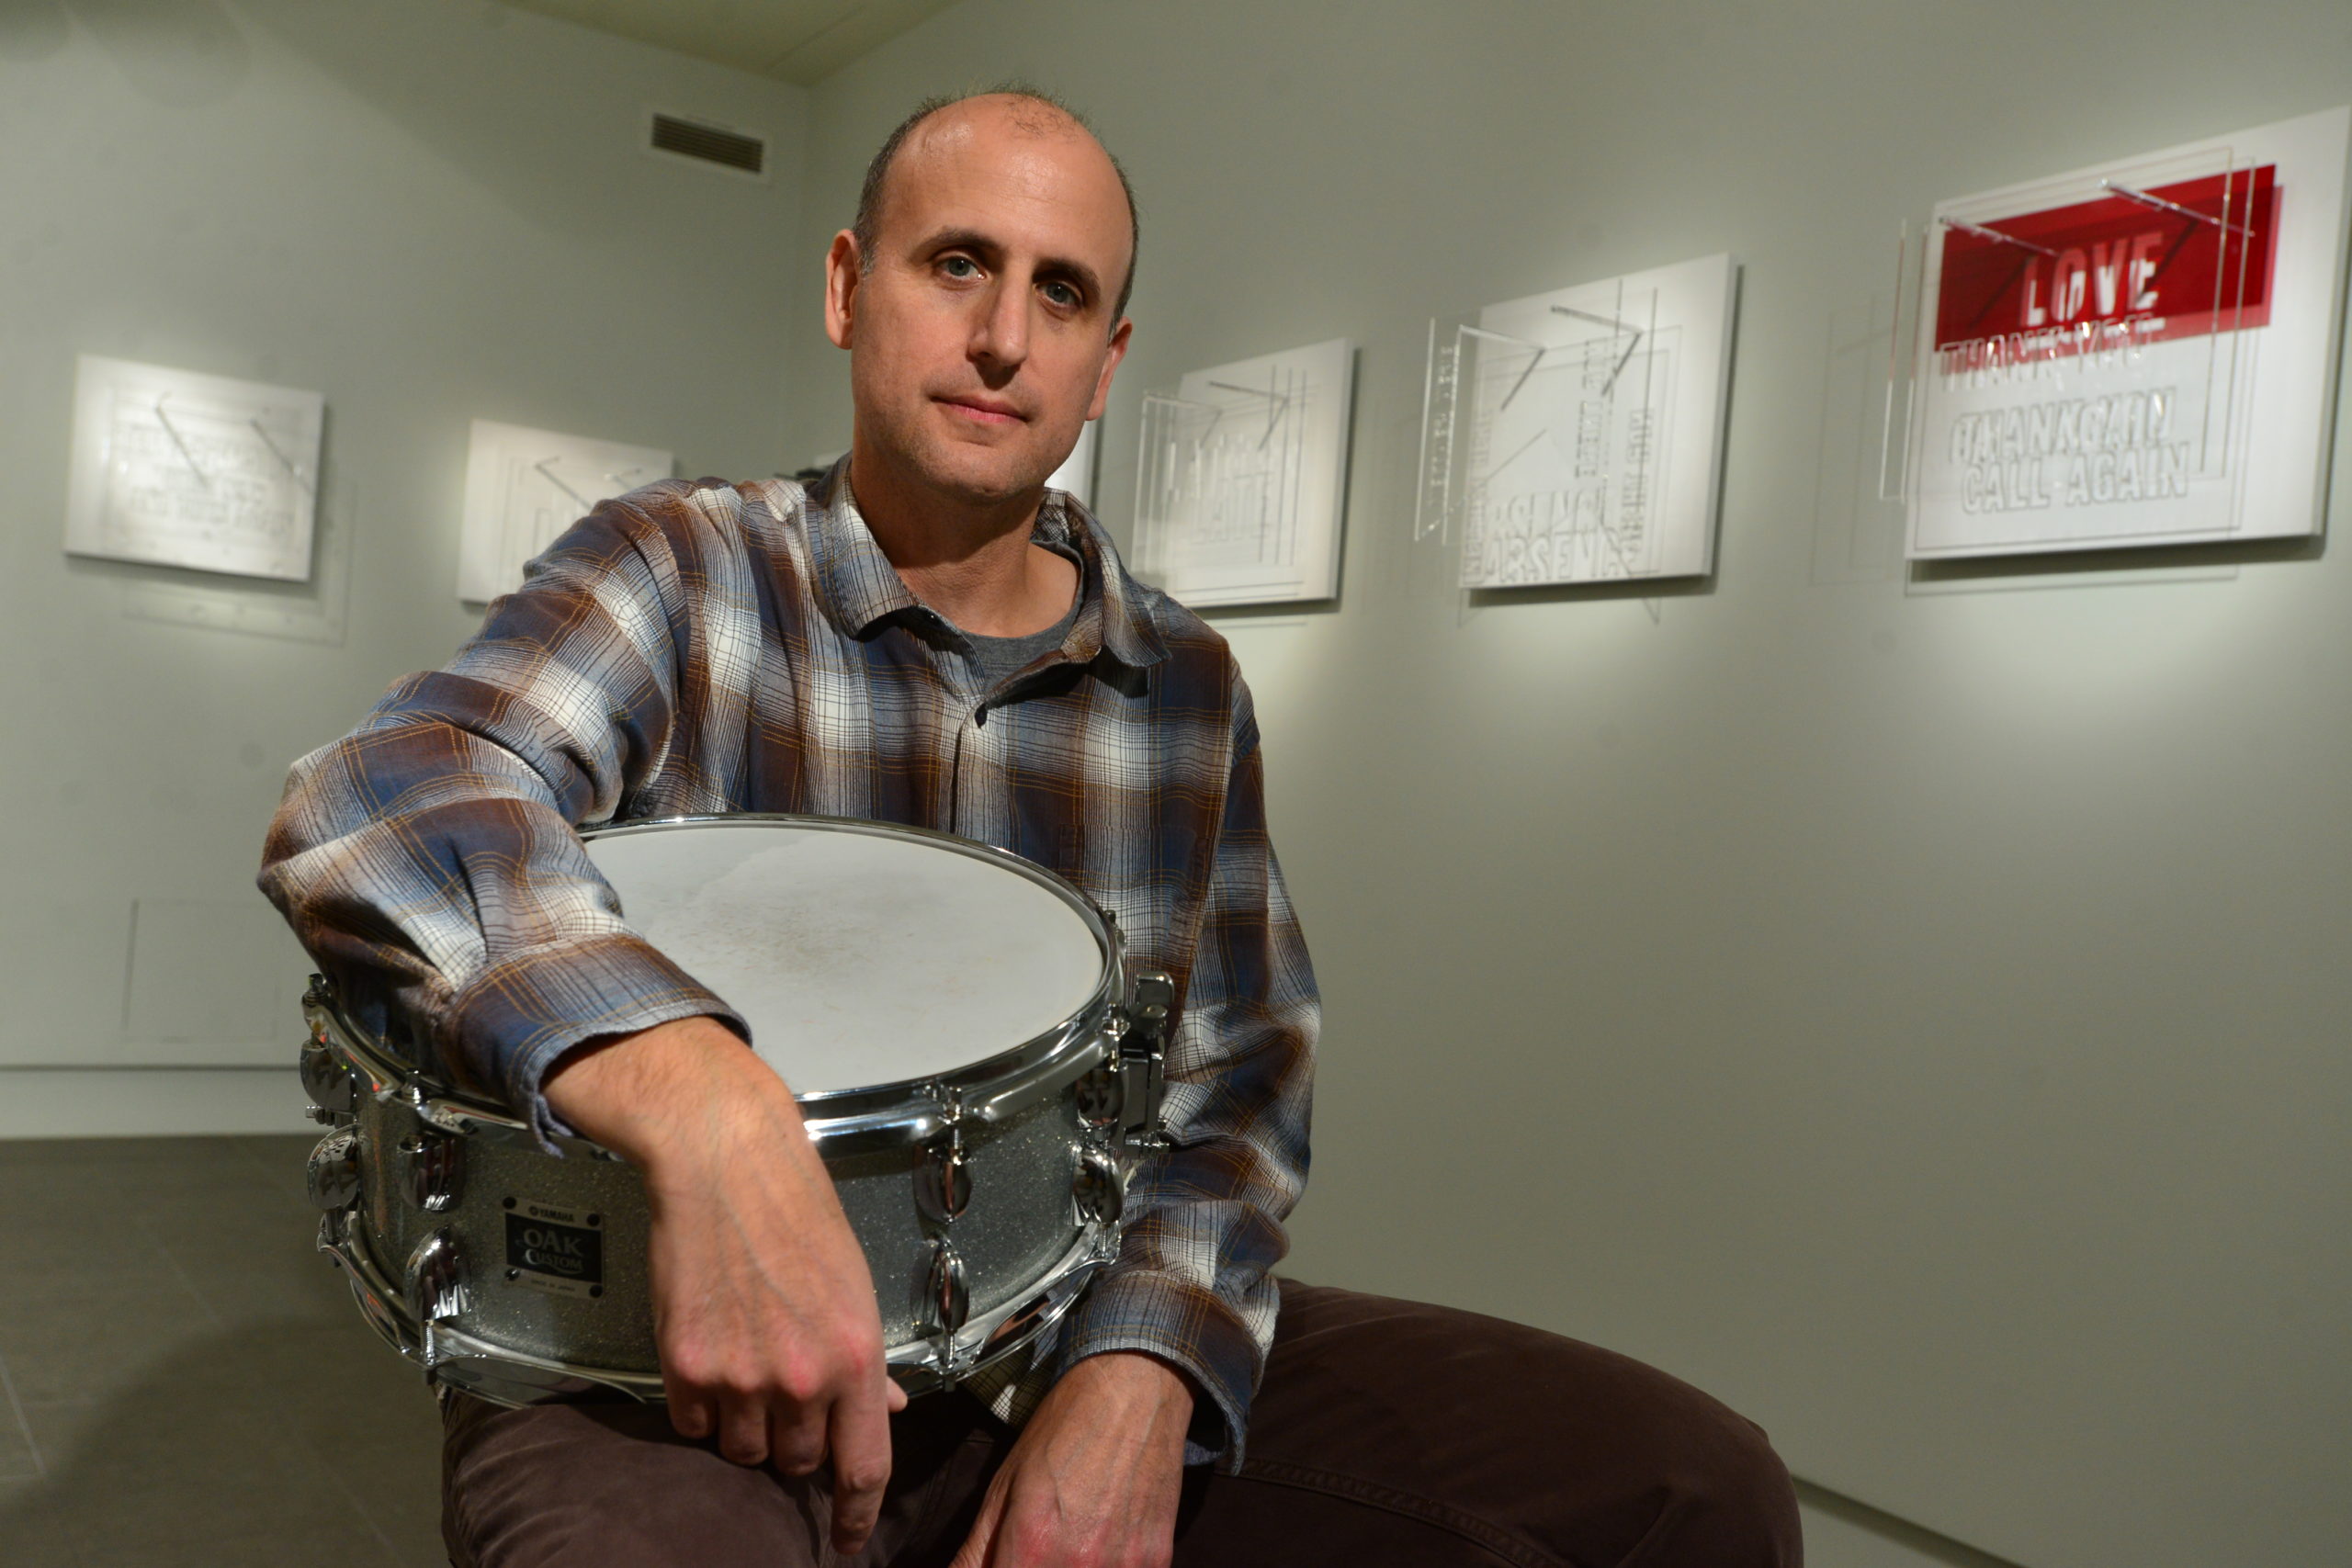 Michael Gould seated in an art gallery with a snare drum in his lap. He is surrounded by an installation of art he has created featuring acrylic cut outs of words on a white background.